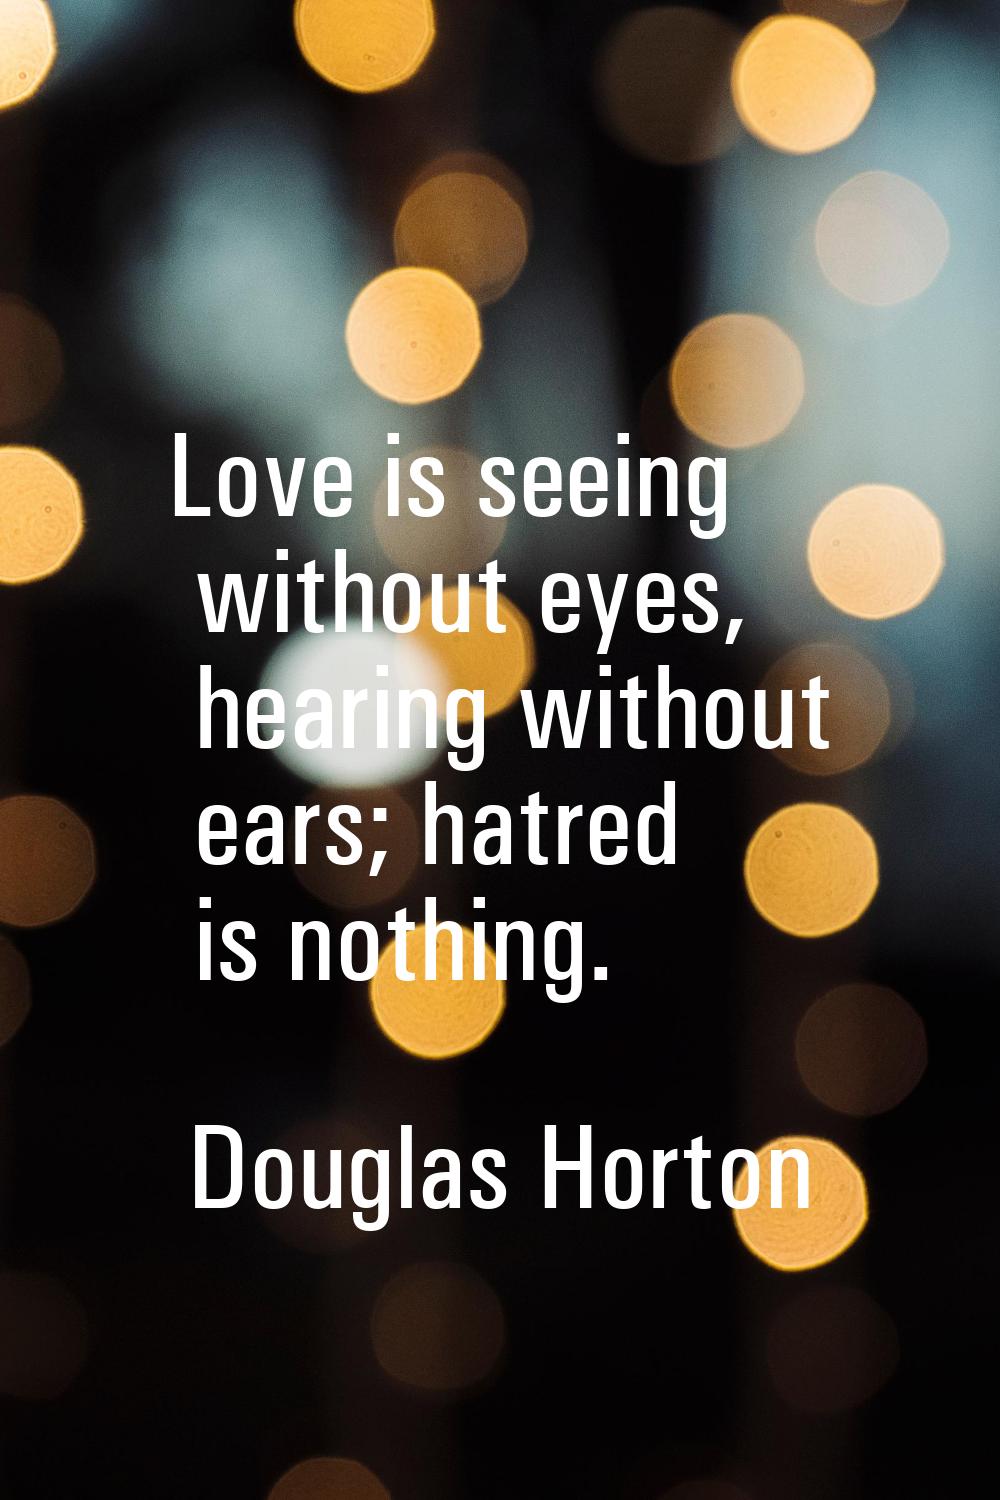 Love is seeing without eyes, hearing without ears; hatred is nothing.